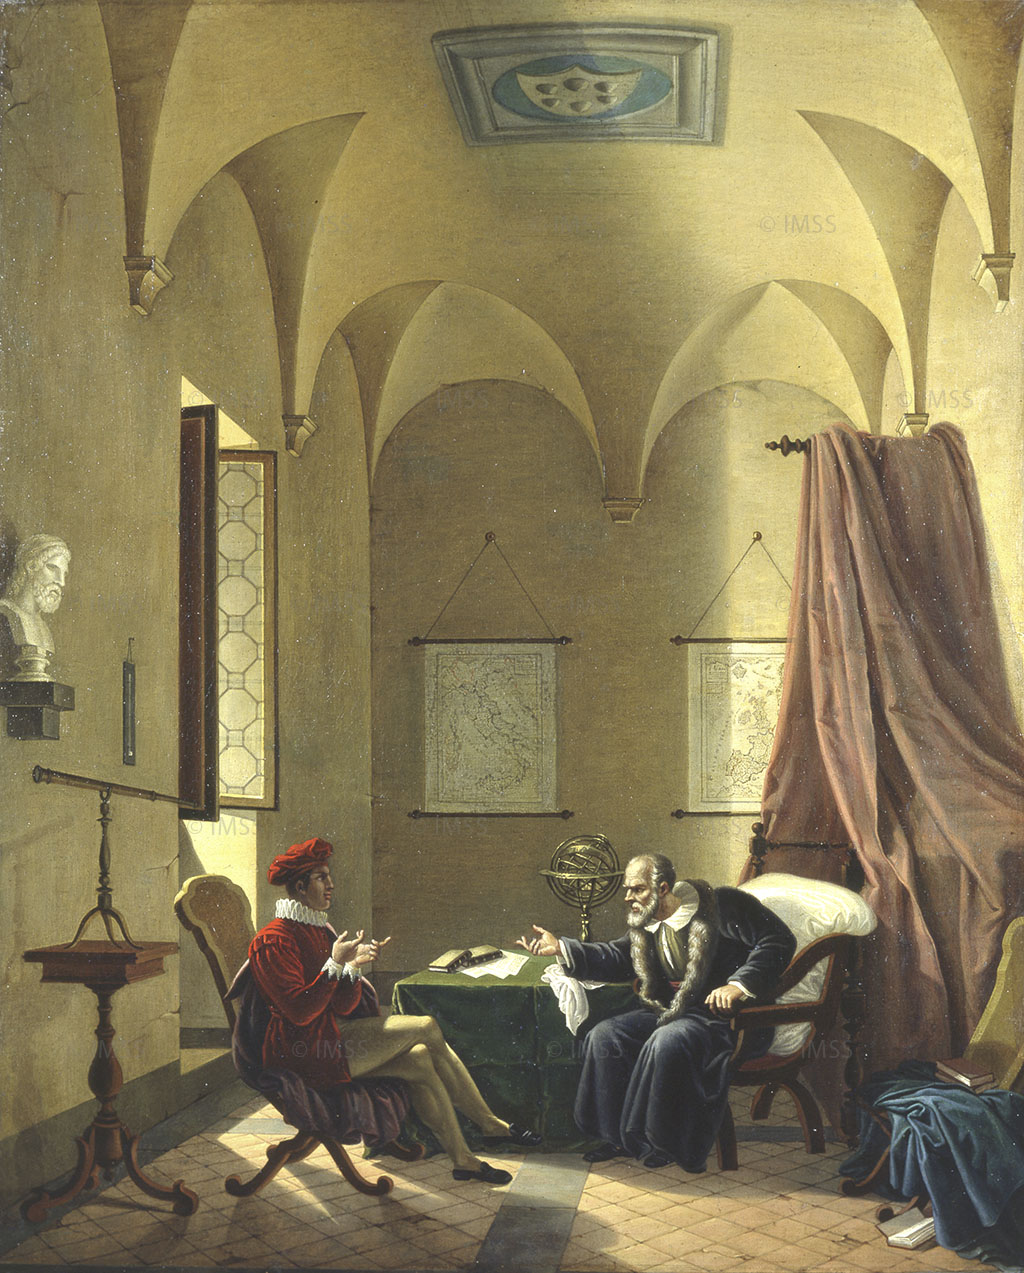 Post 1874, Oil on canvas, cm 56 x 46, Florence, Institute and Museum of the History of Science, Inv. 3682